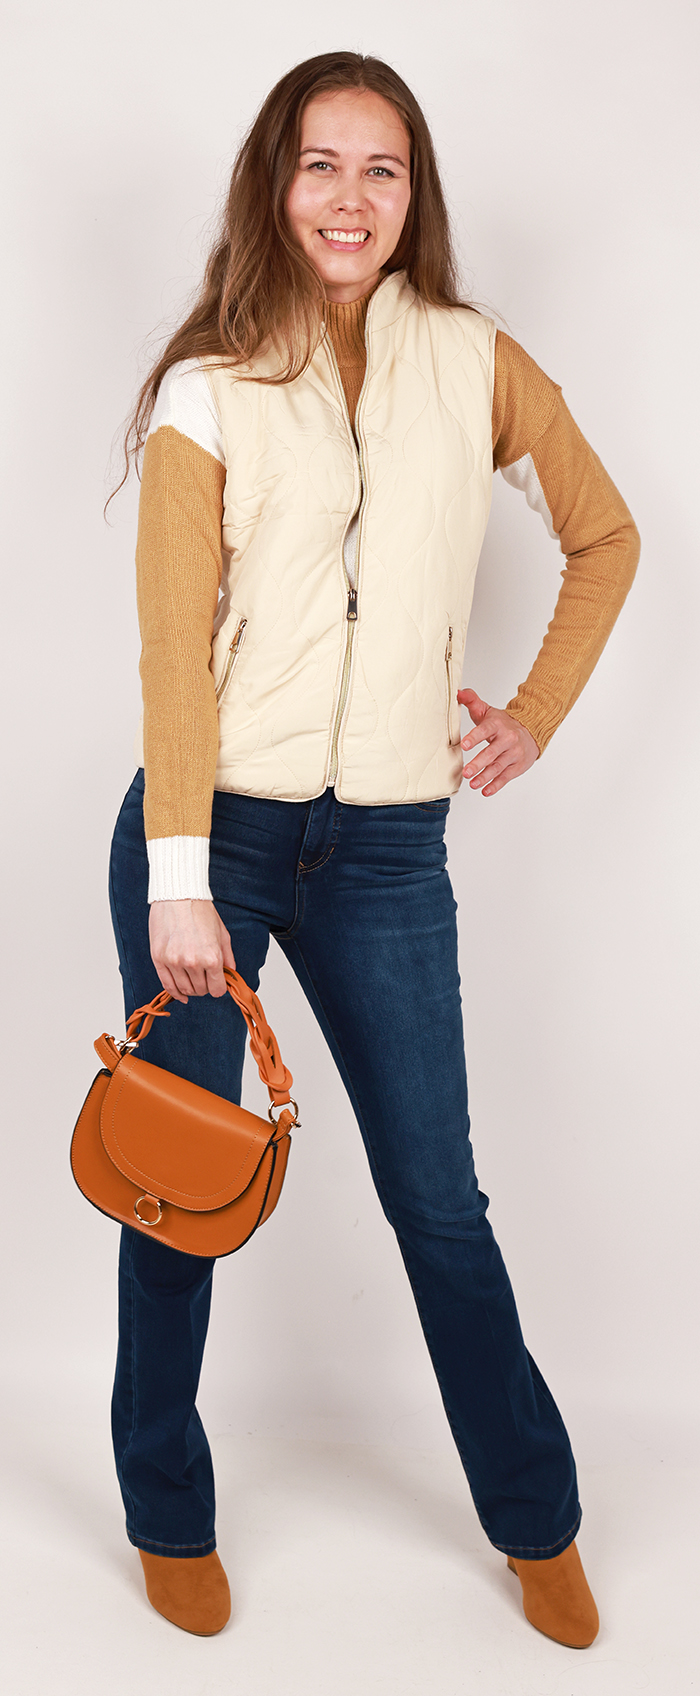 Cute, cozy and fashionable all at once, you set the standard with our "BHJ" Sleeveless Quilted Vest Jacket, "Full Circle" Long Sleeve Mock Neck Color Block Sweater, "DJEANS" Straight Leg Denim Jeans, and "Forever" 3" Wedge Heel Booties.